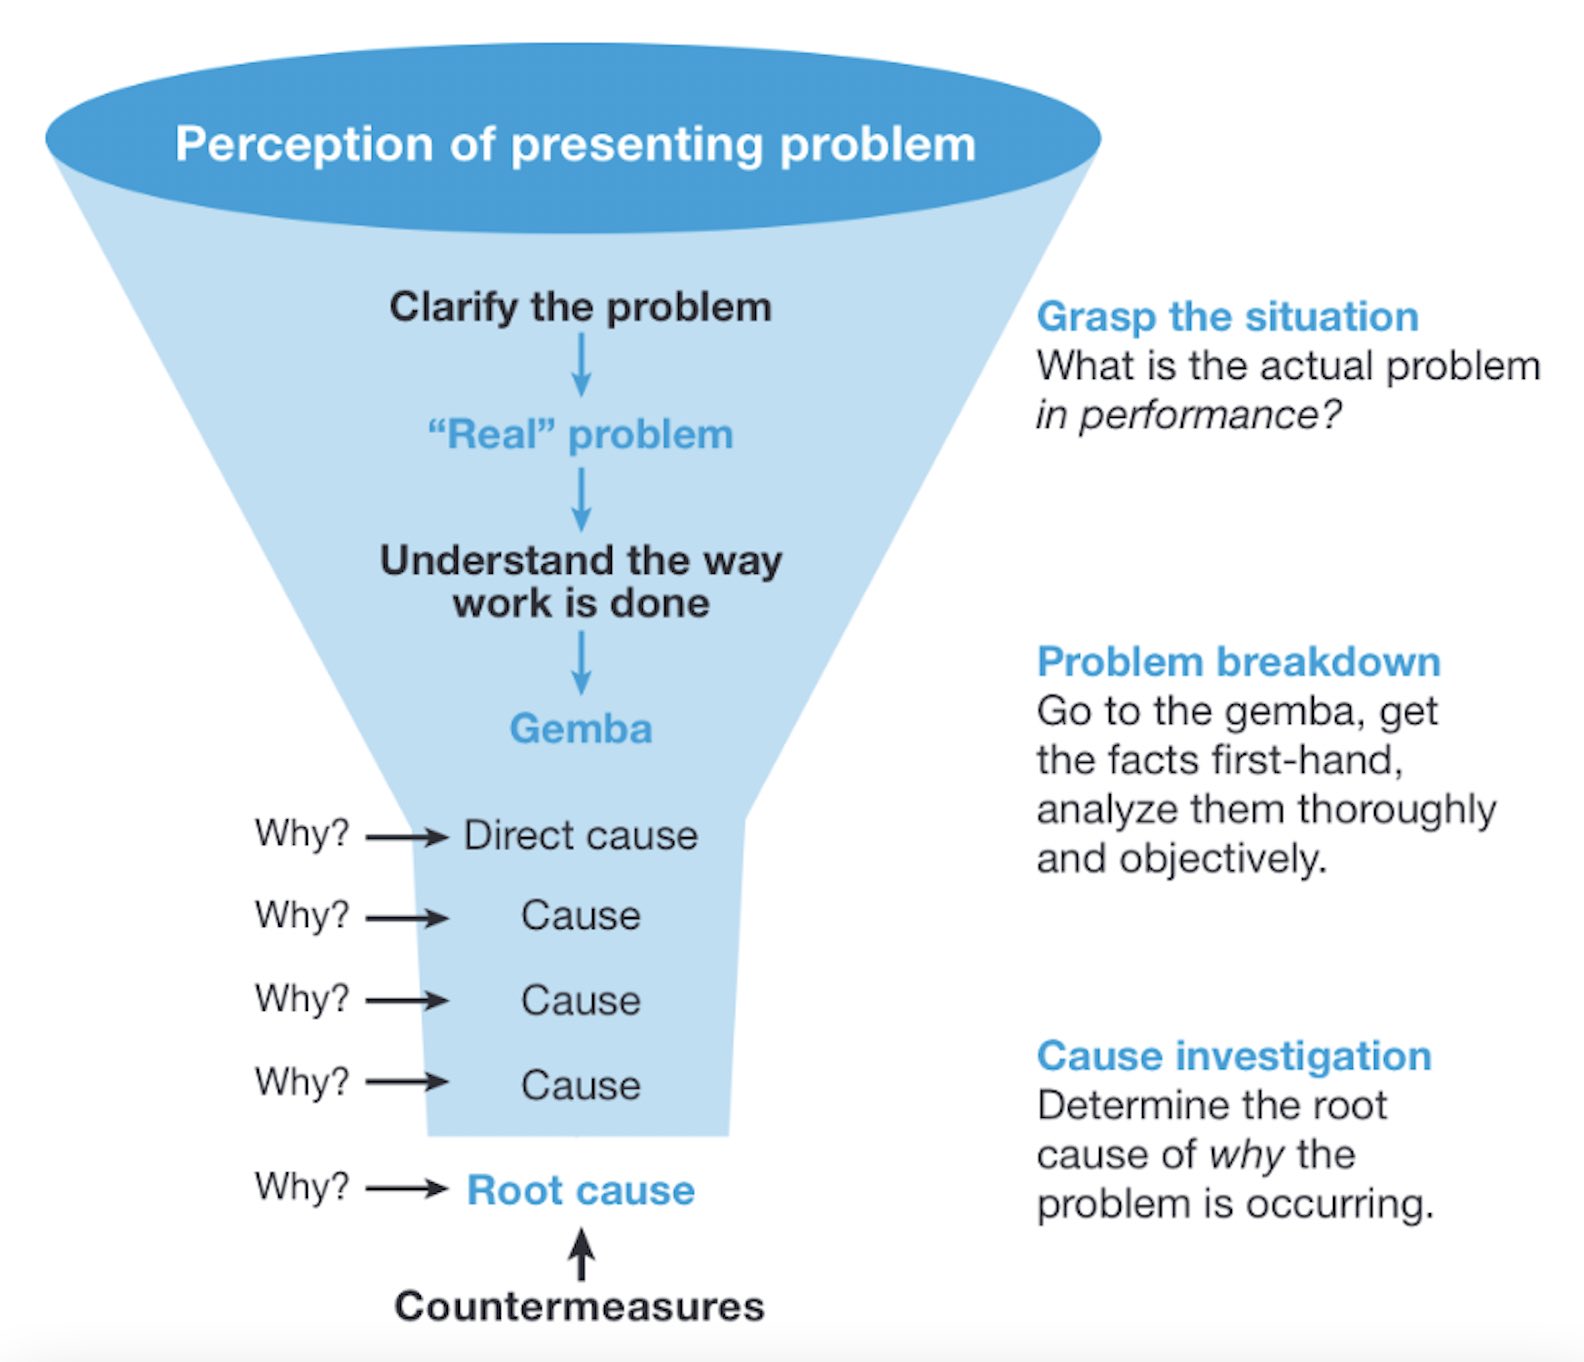 5 whys approach to problem solving